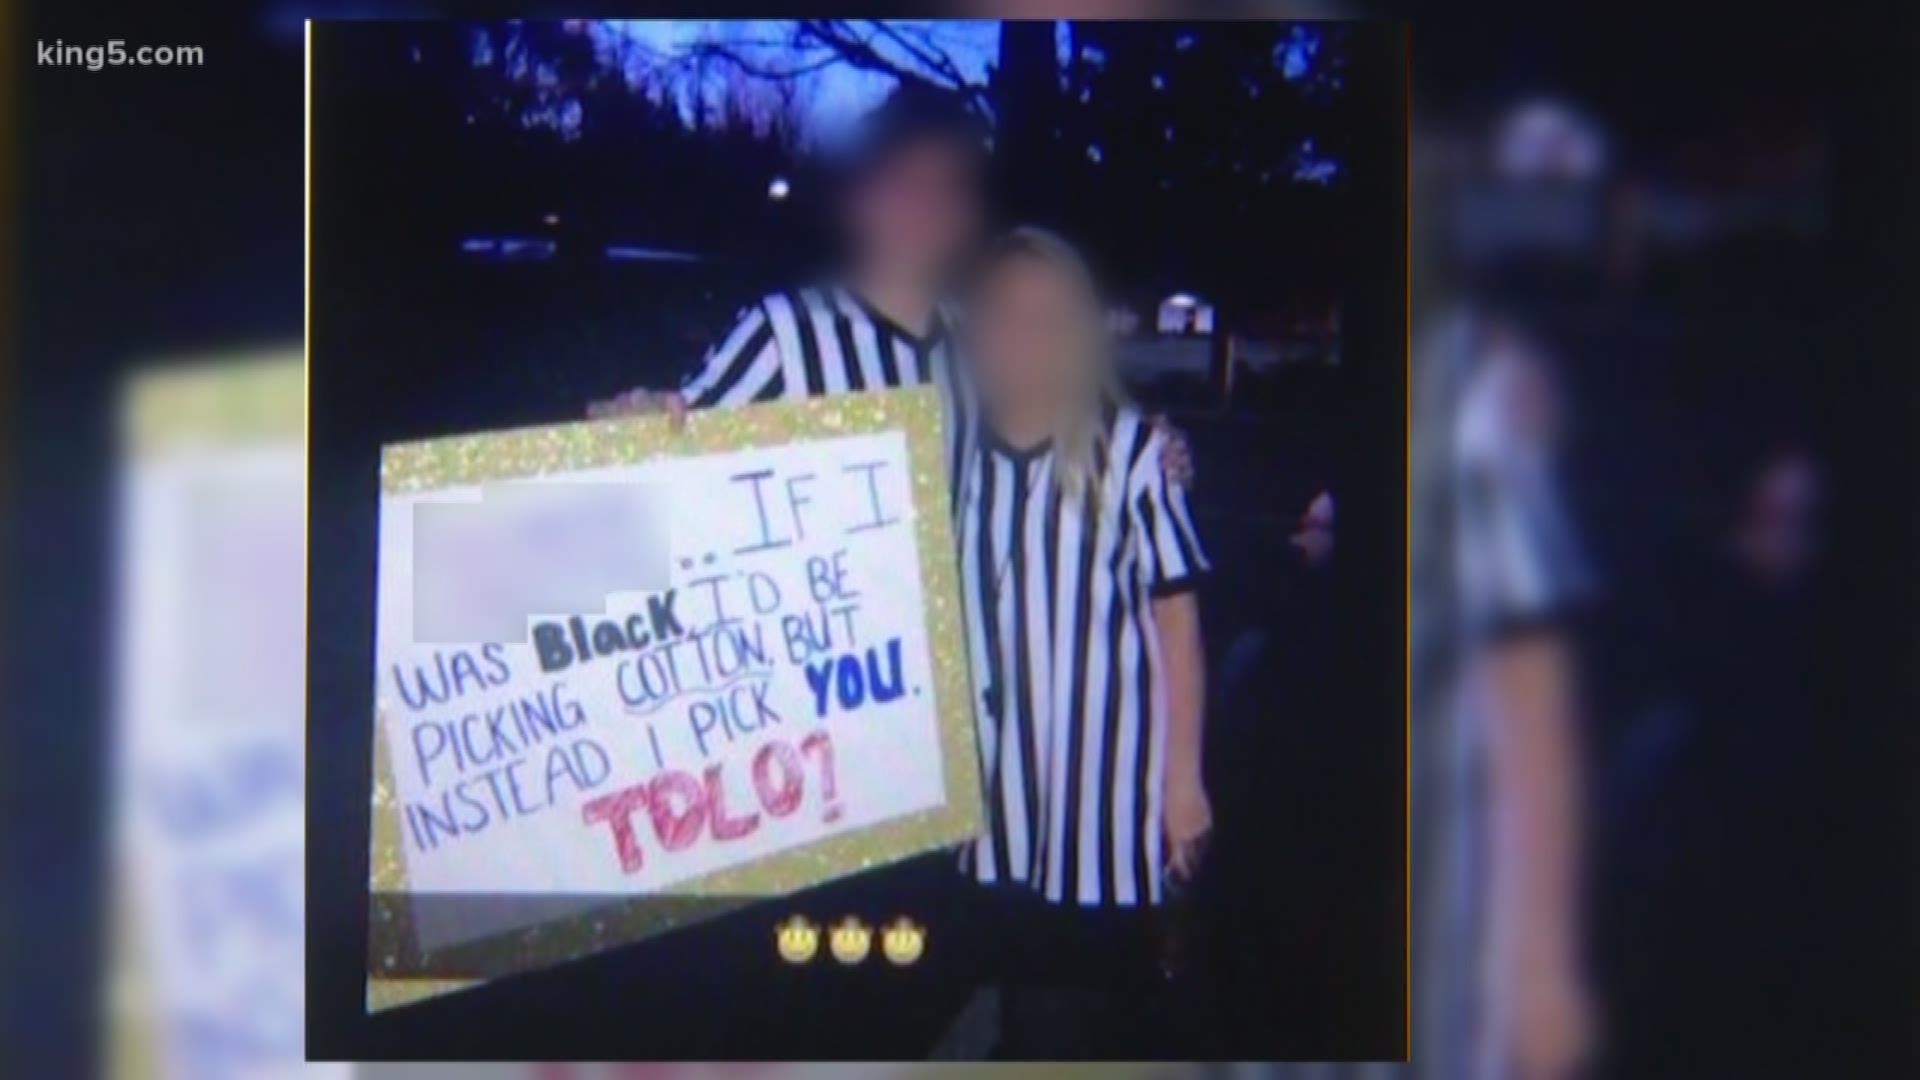 "Awful and appaling." That is how the Issaquah School District describes the way one student asked another to a school dance. The district says the female student's racially insensitive words were shared on social media and are now the focus of an investigation. As KING 5's Natalie Swaby reports, the post many are calling racist has created some painful reaction.